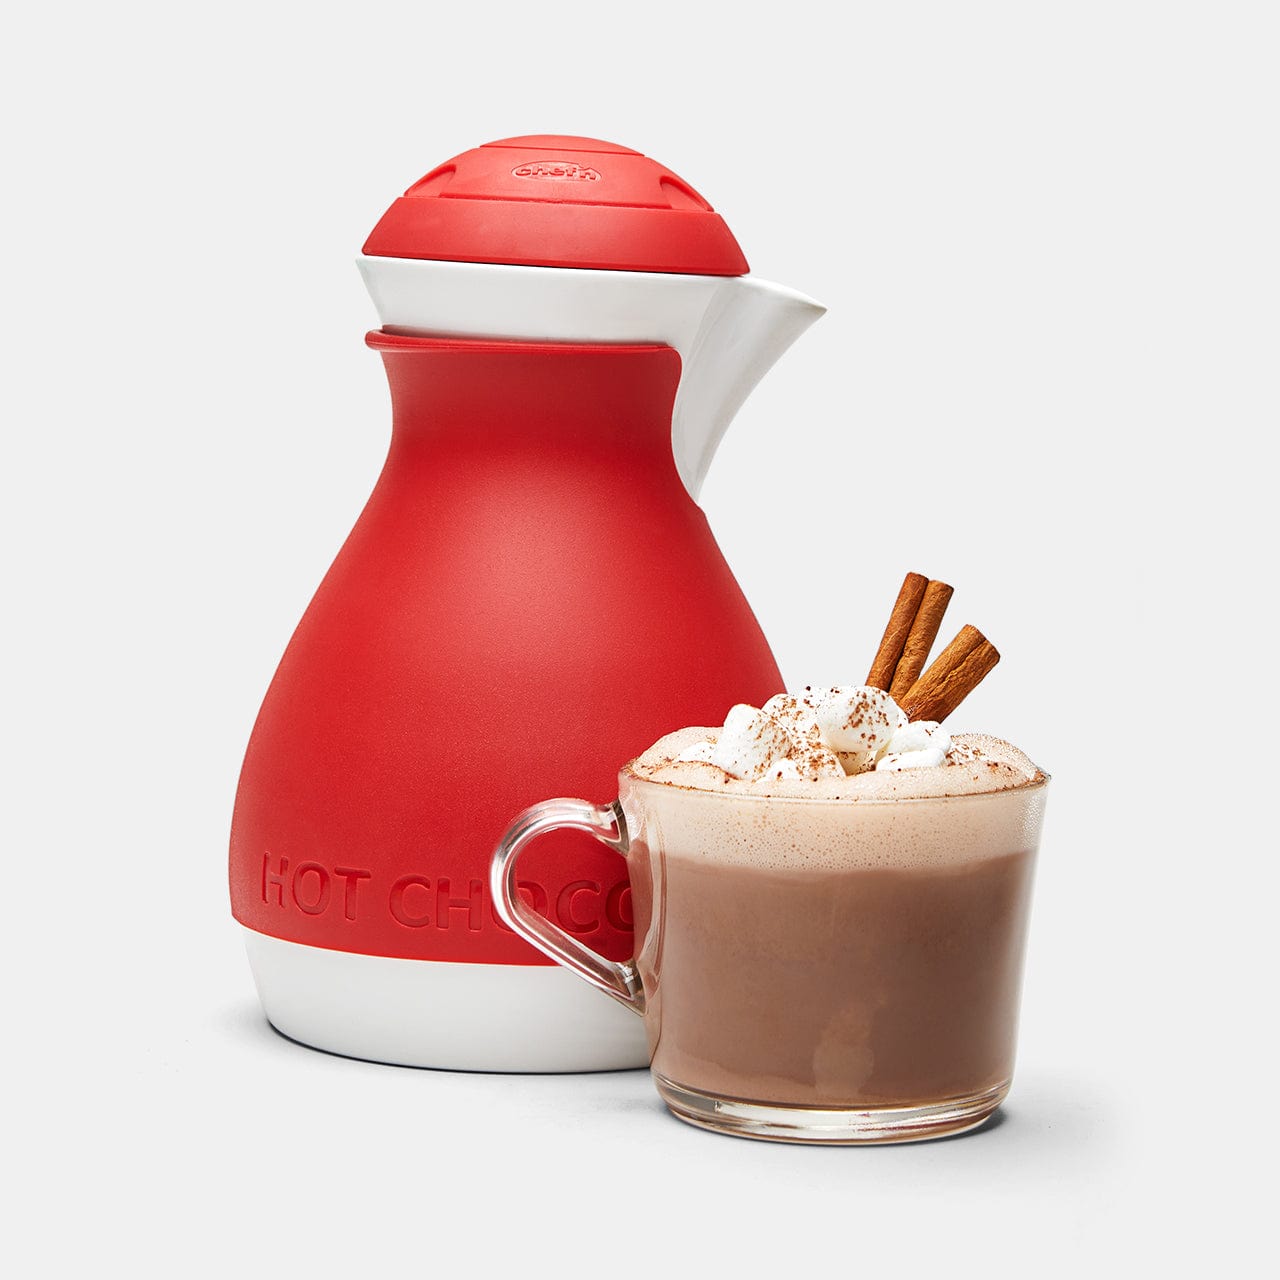 Gourmet Hot Cocoa Pot And Frother Set Include Cocoa and Marshmallows.